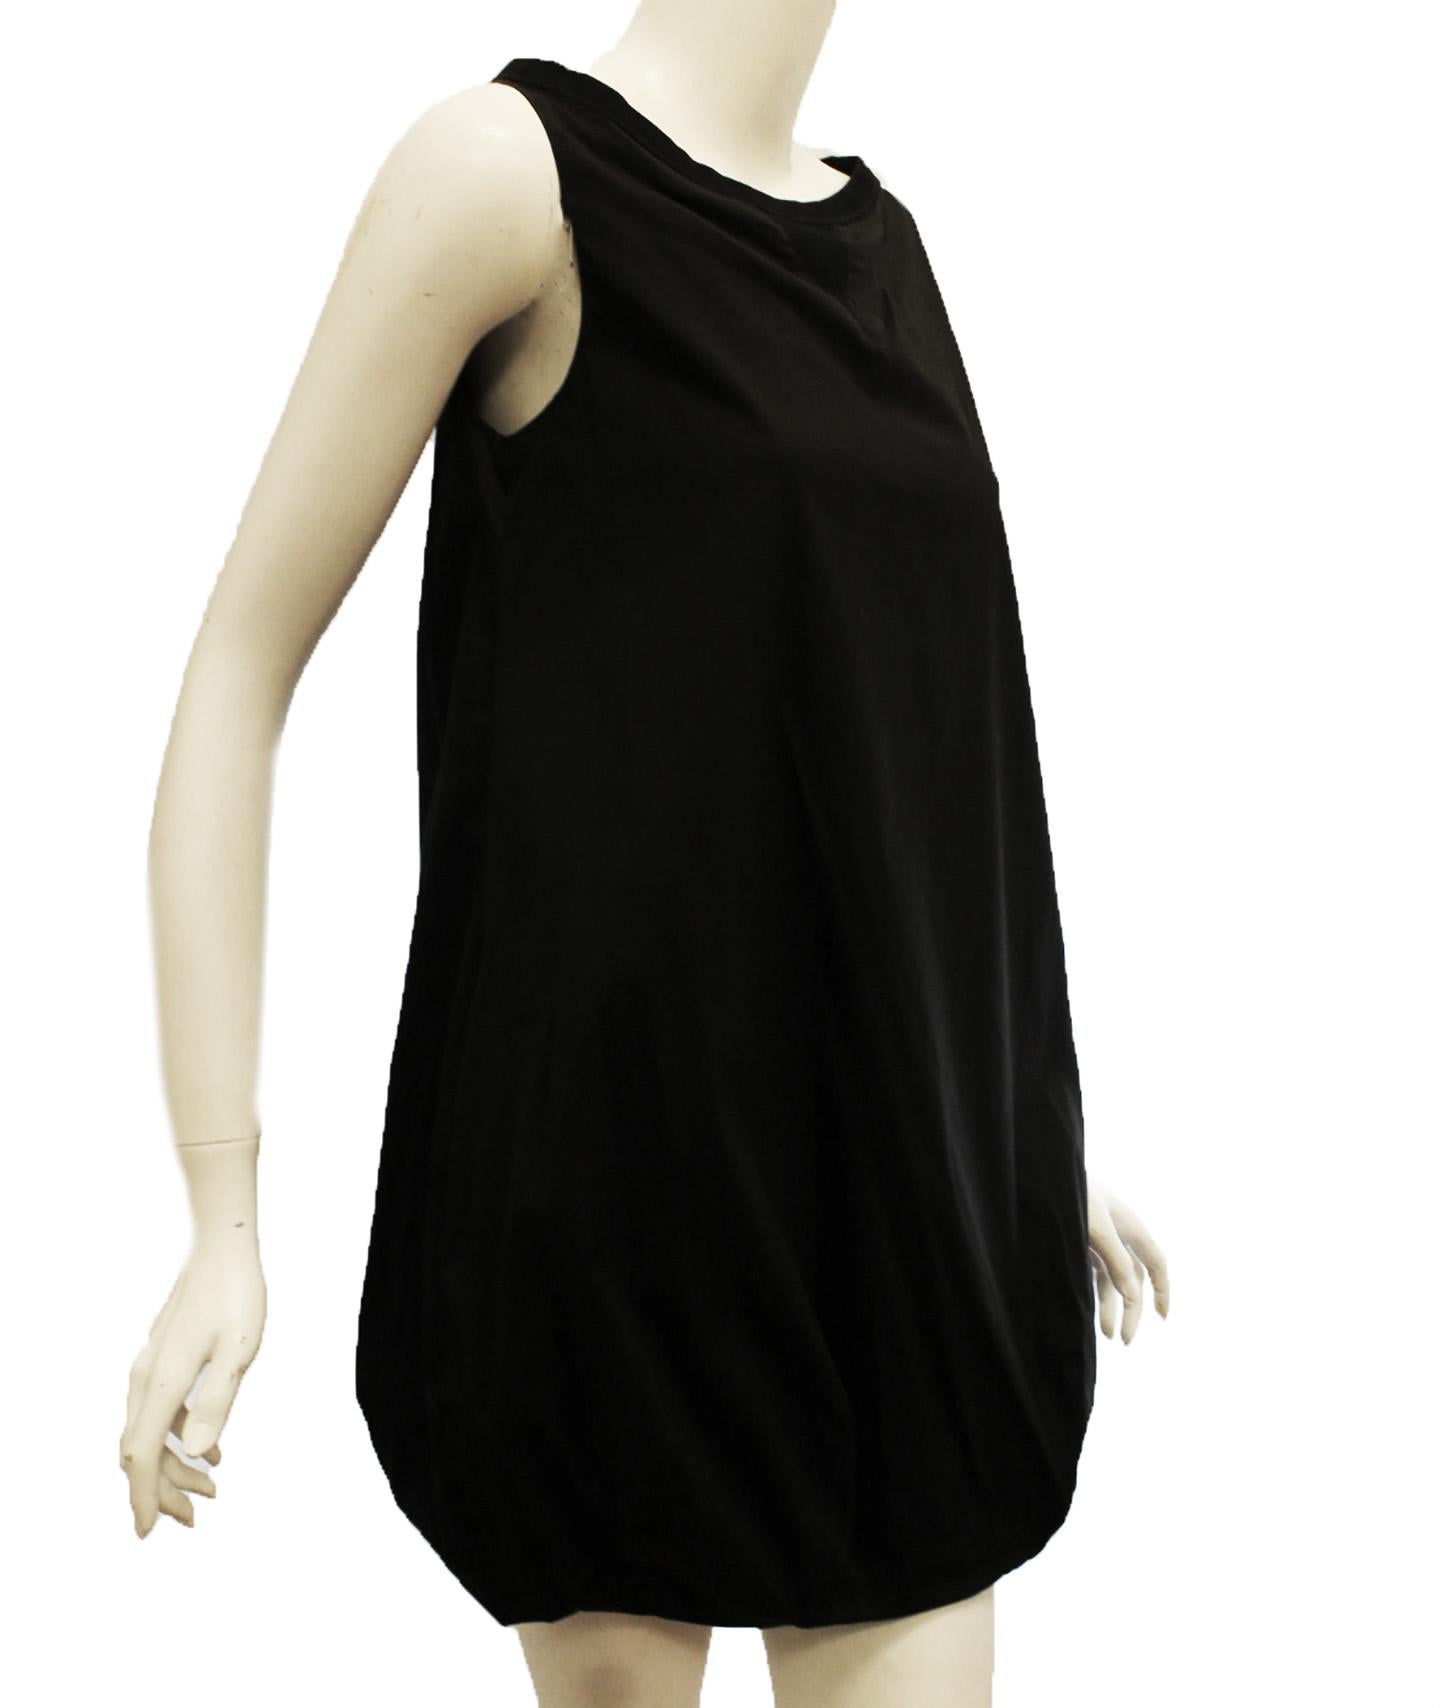 Prada black loose fitting cotton blend sleeveless dress is effortless and alluring in equal measure. This dress incorporates a ribbed knit bateau neckline with triangle accent at chest.   This loose fitting dress is gathered at the hem for that